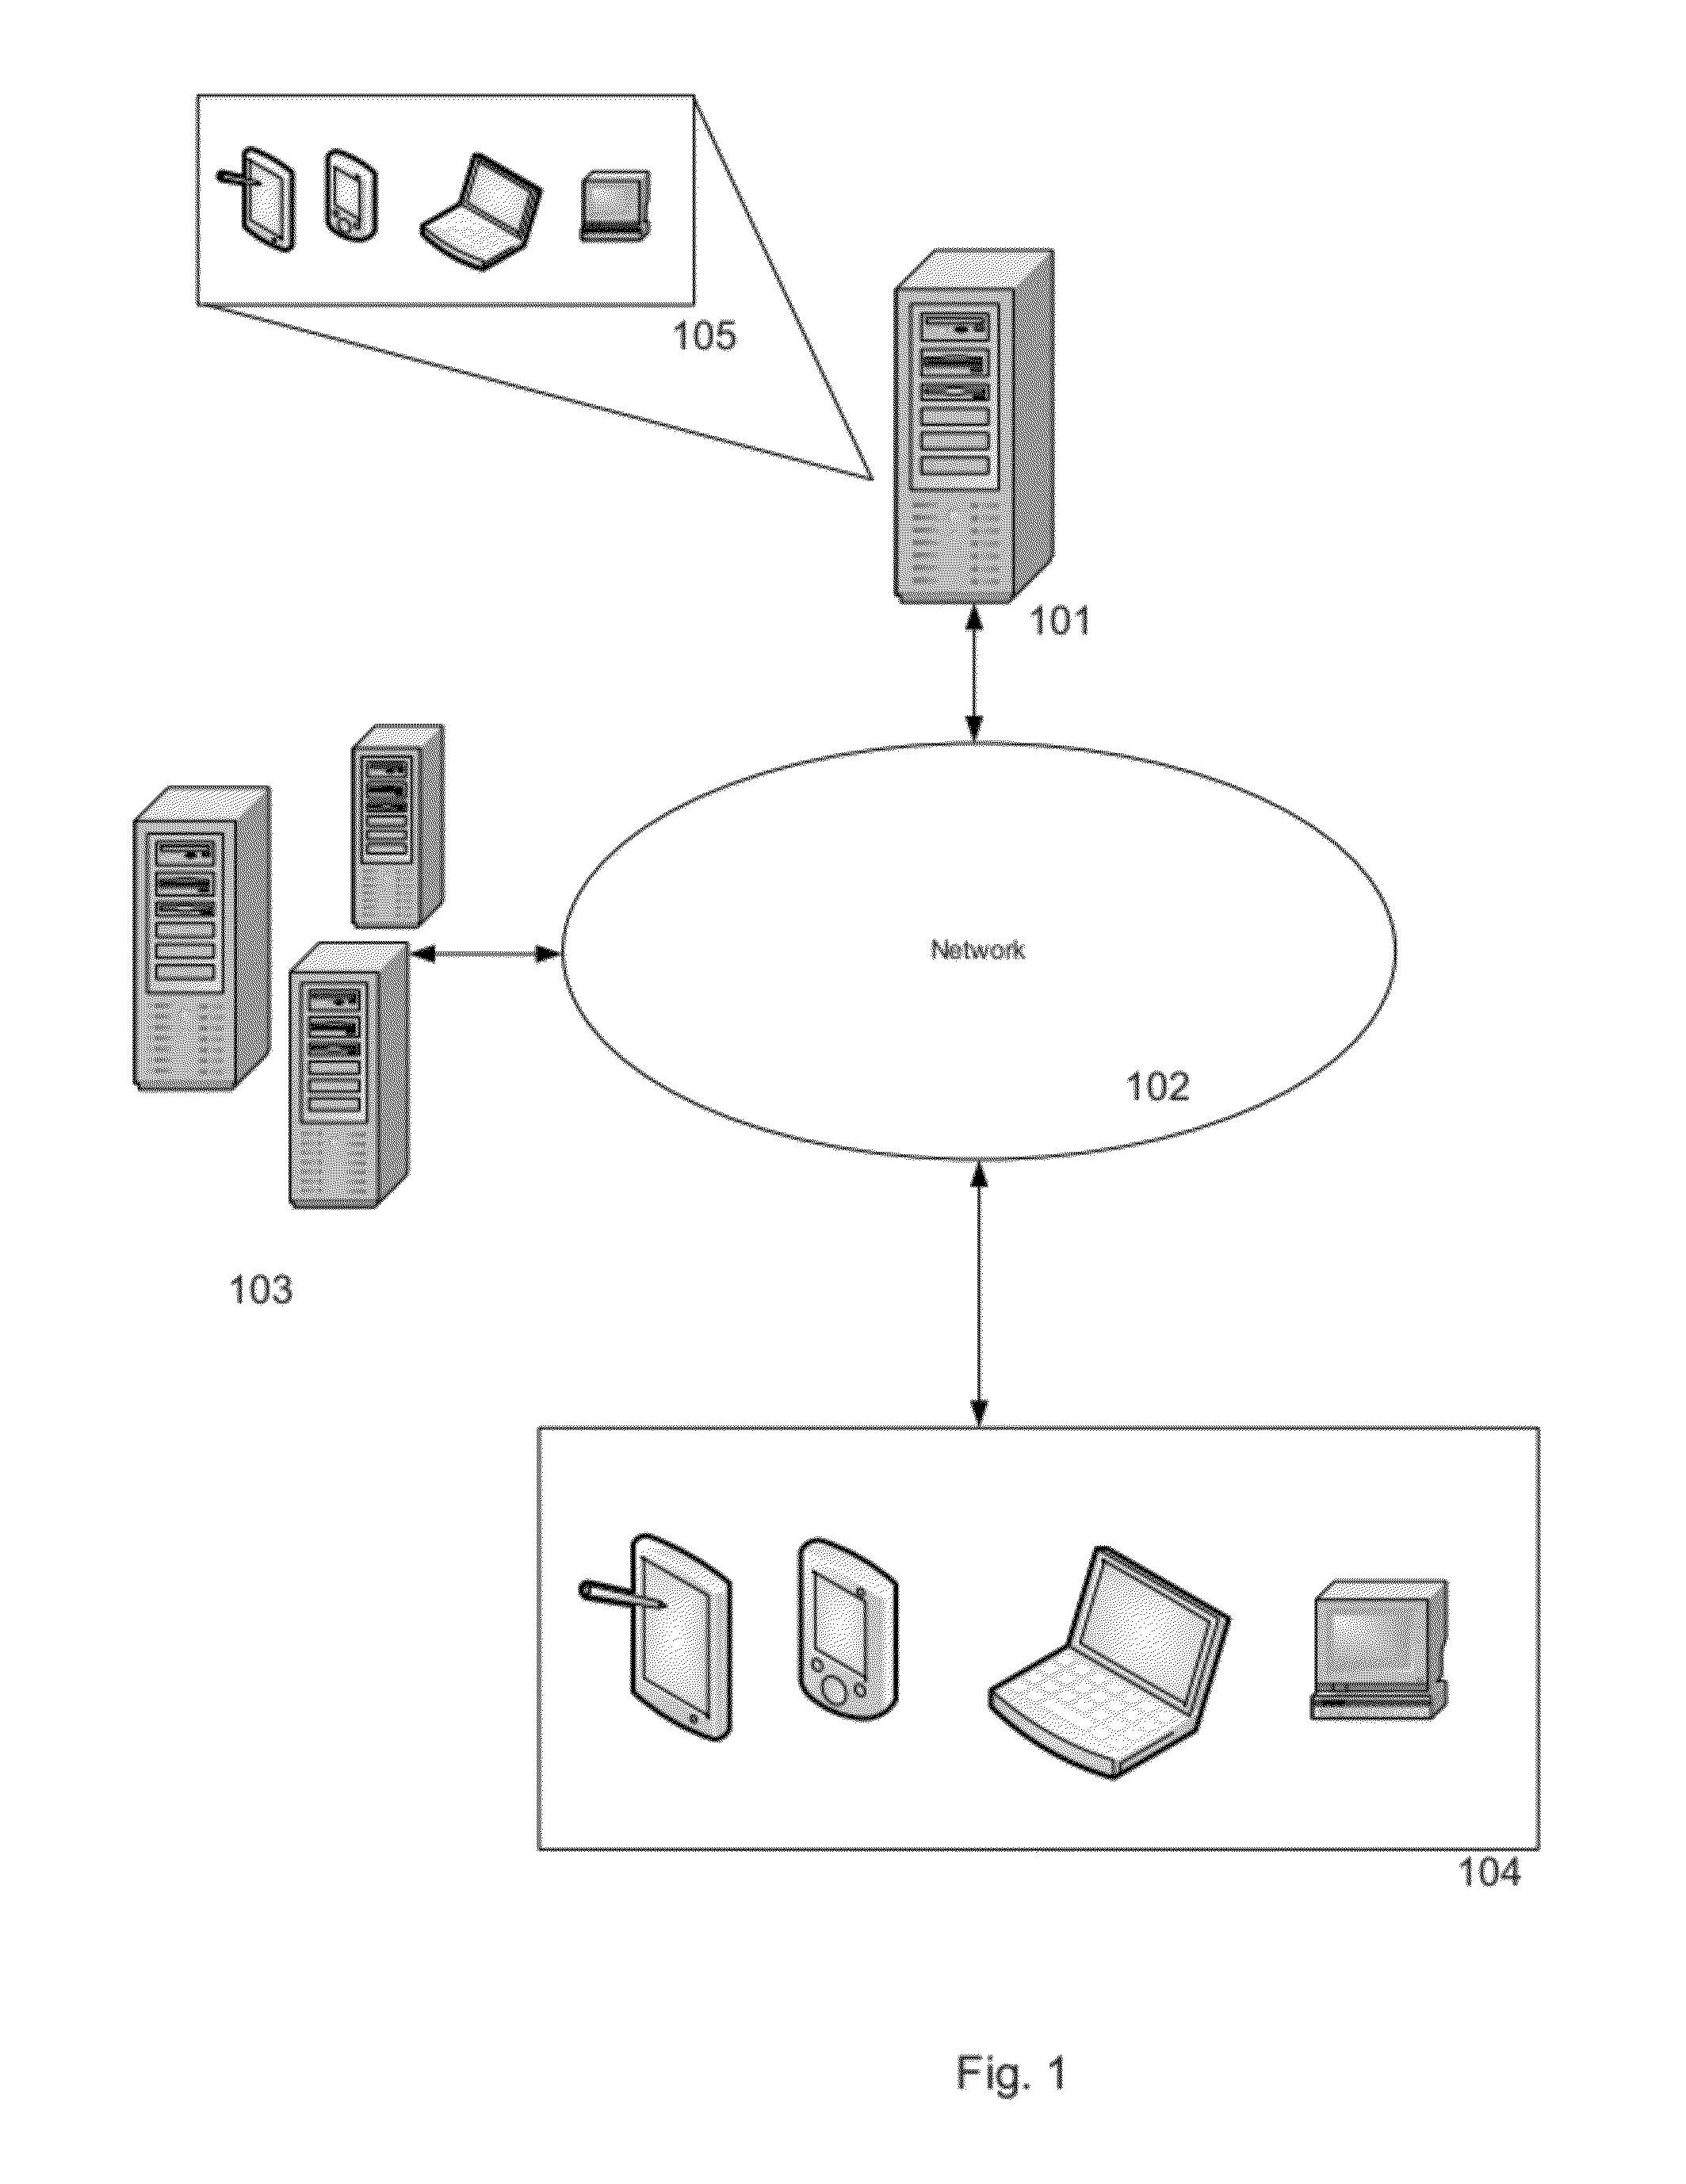 System and method for providing an interactive remote controlled jukebox